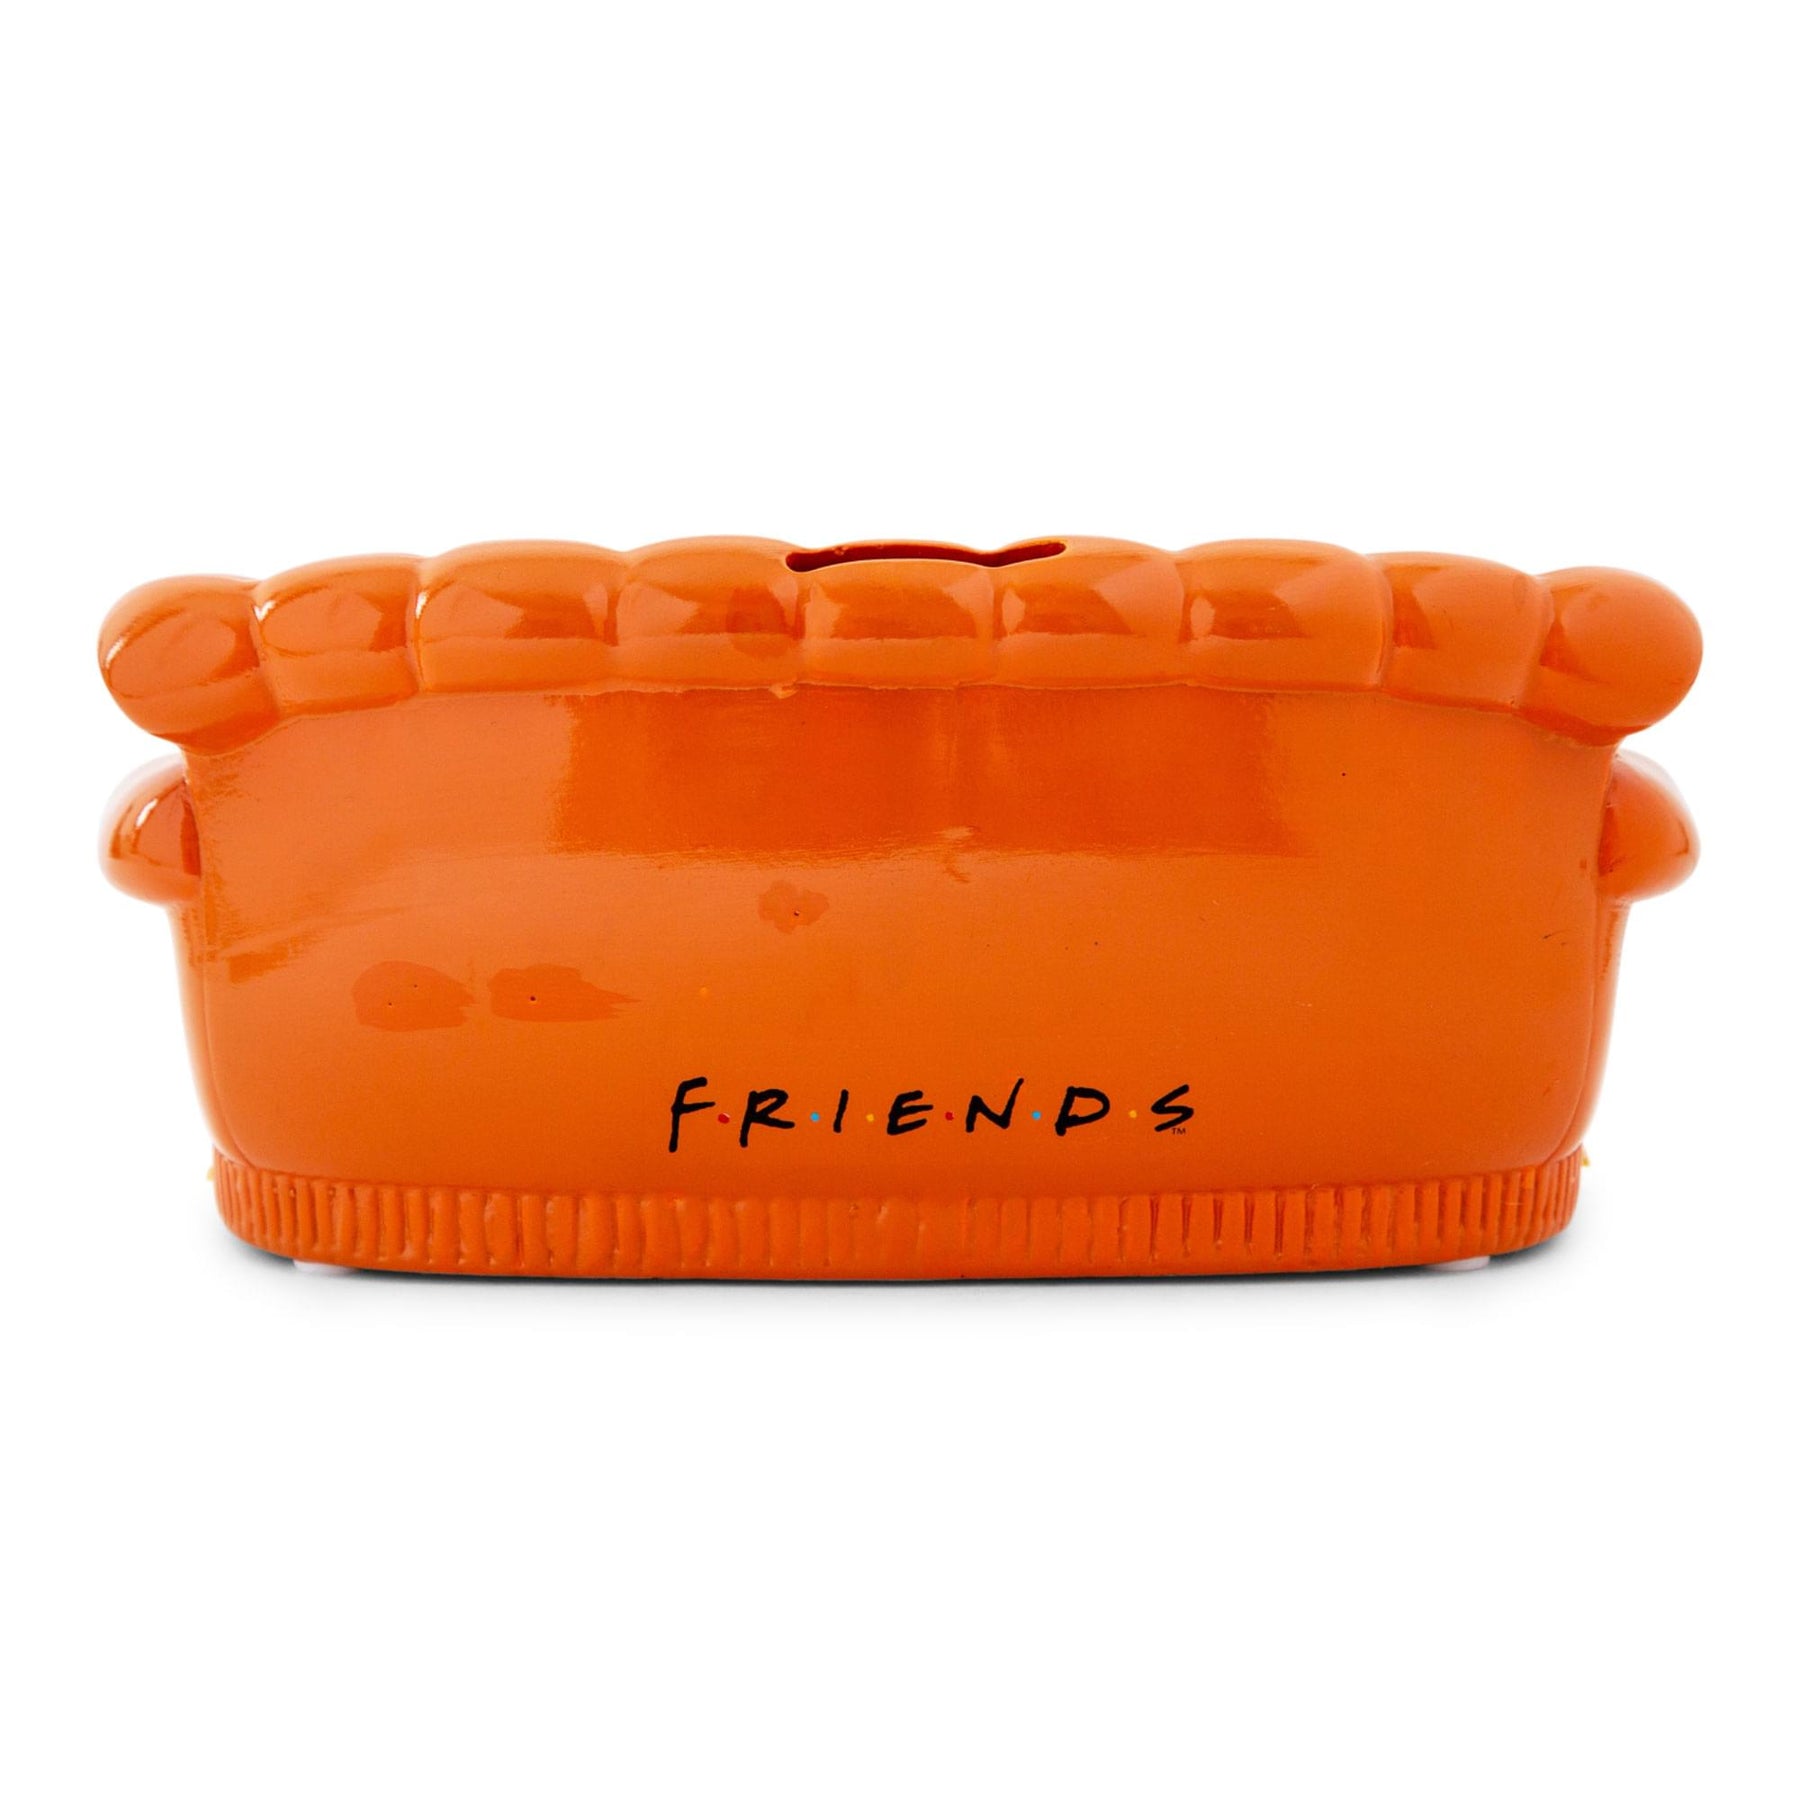 Friends Central Perk Orange Couch Figural Coin Bank Storage | Toynk Exclusive